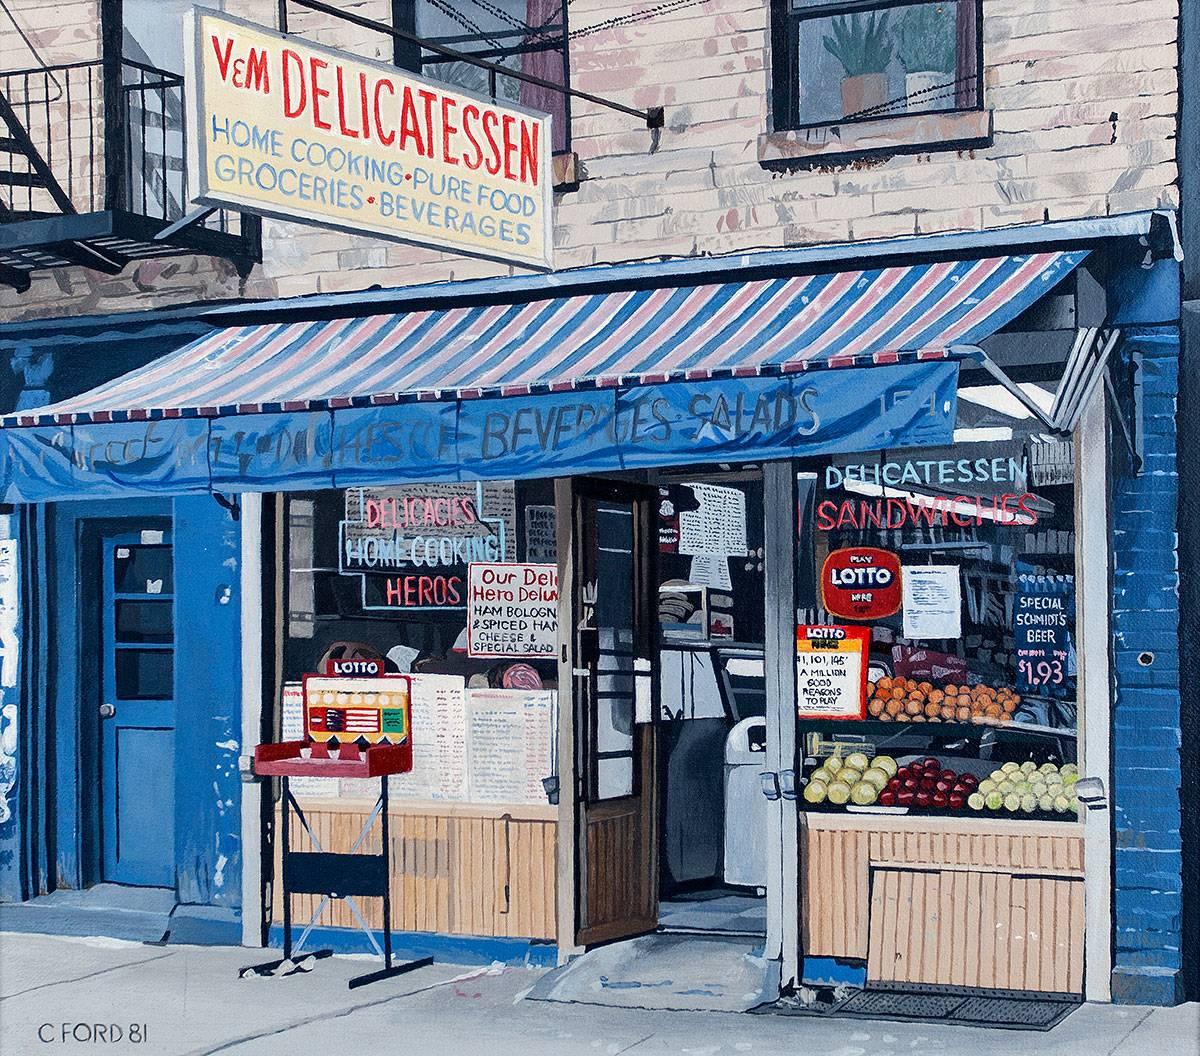 V and M Delicatessen - Painting by Charles Ford